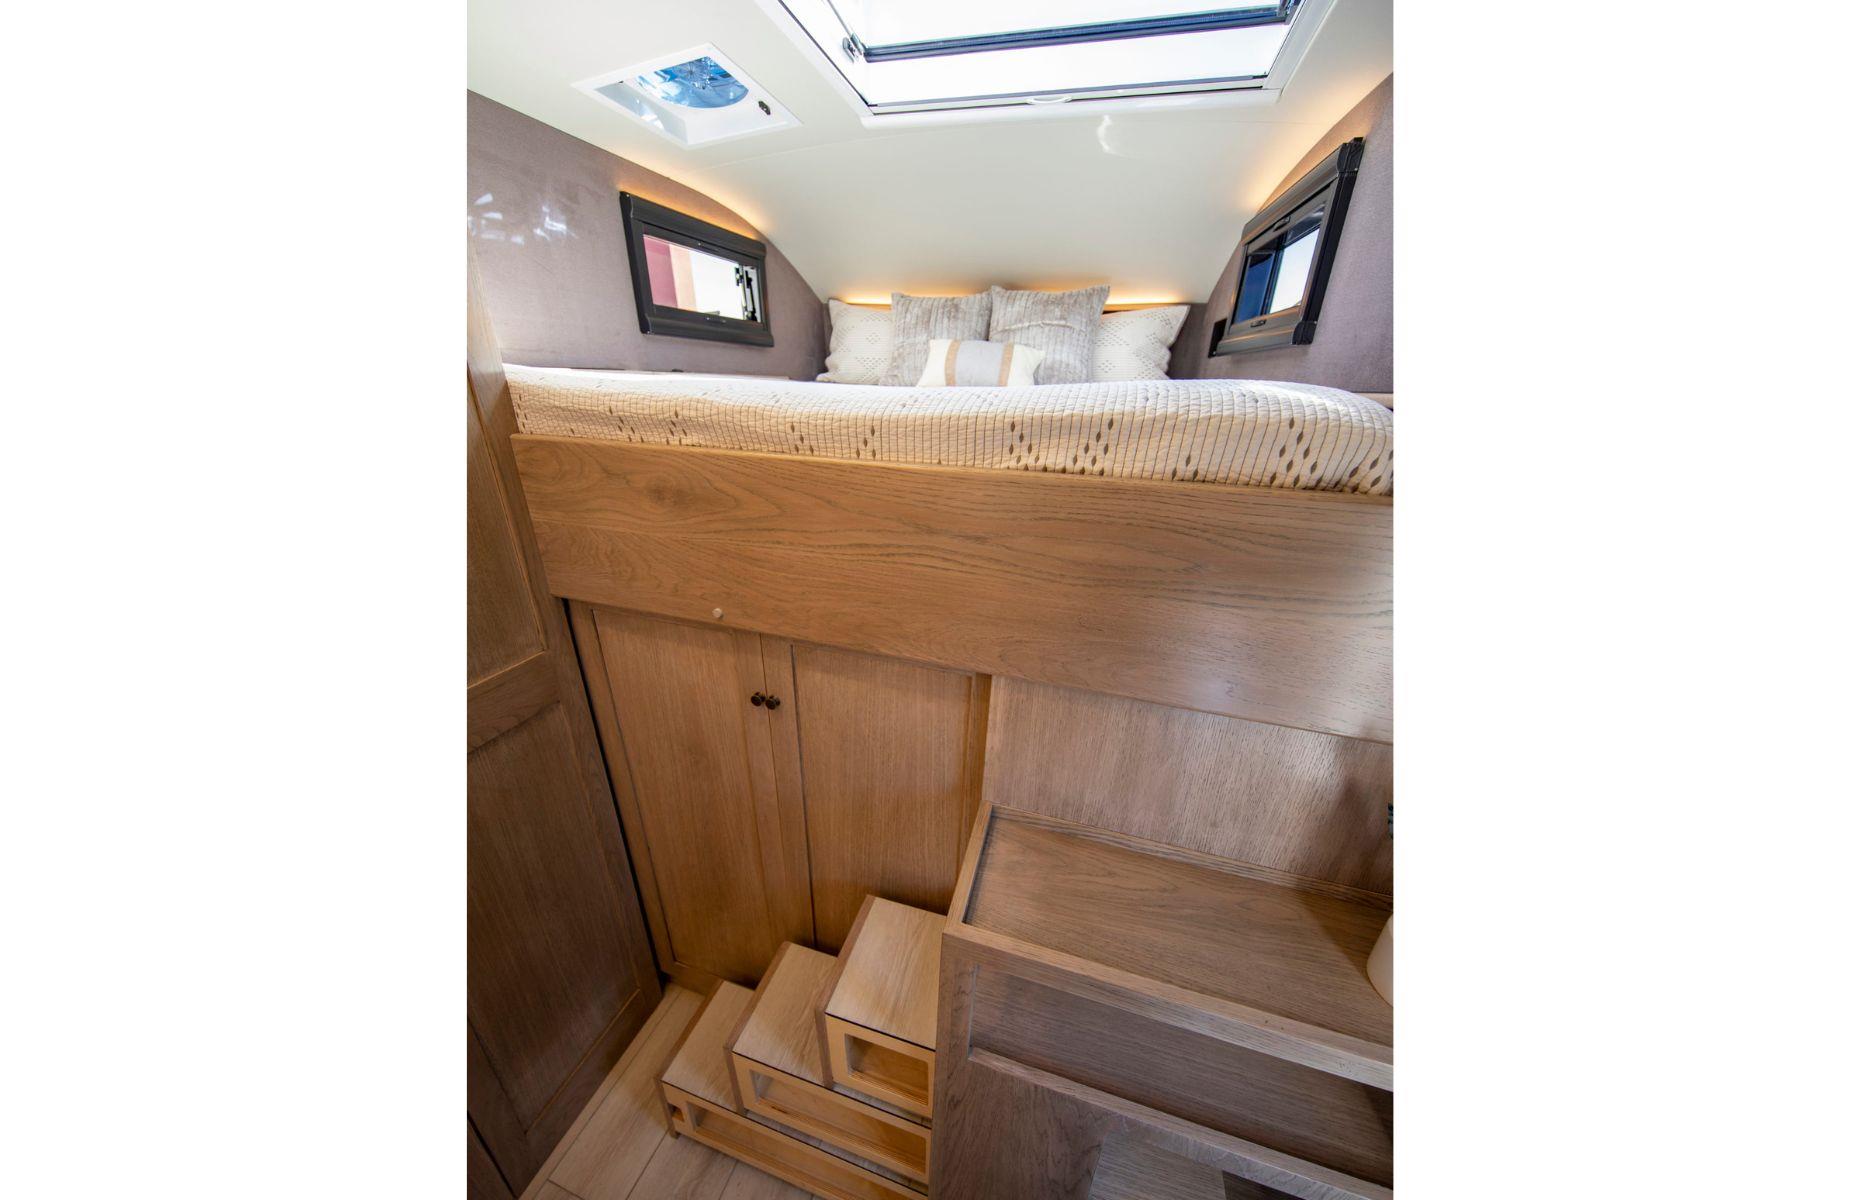 <p>Capable of accommodating up to six people, the motorhome offers a cozy king-sized master bedroom, complete with its own stylish ensuite, while the main dining area can be converted to offer additional accommodation. Fitted out with two TVs and air conditioning, the RV doesn't scrimp on comfort.</p>